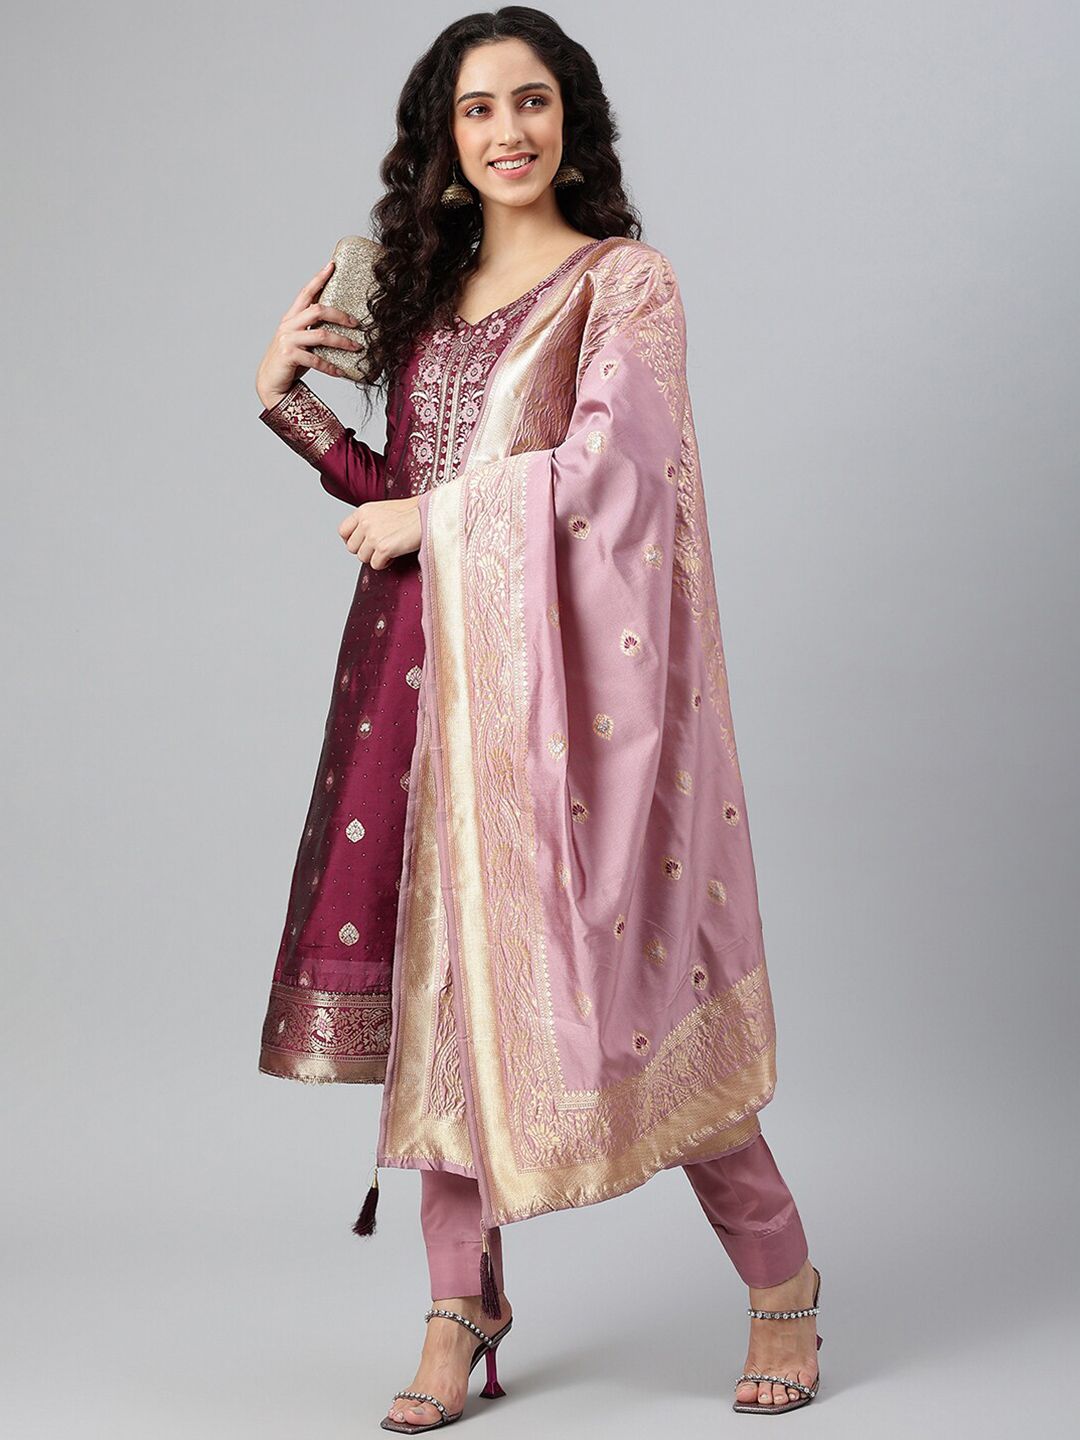 Lilots Violet & Pink Unstitched Dress Material Price in India